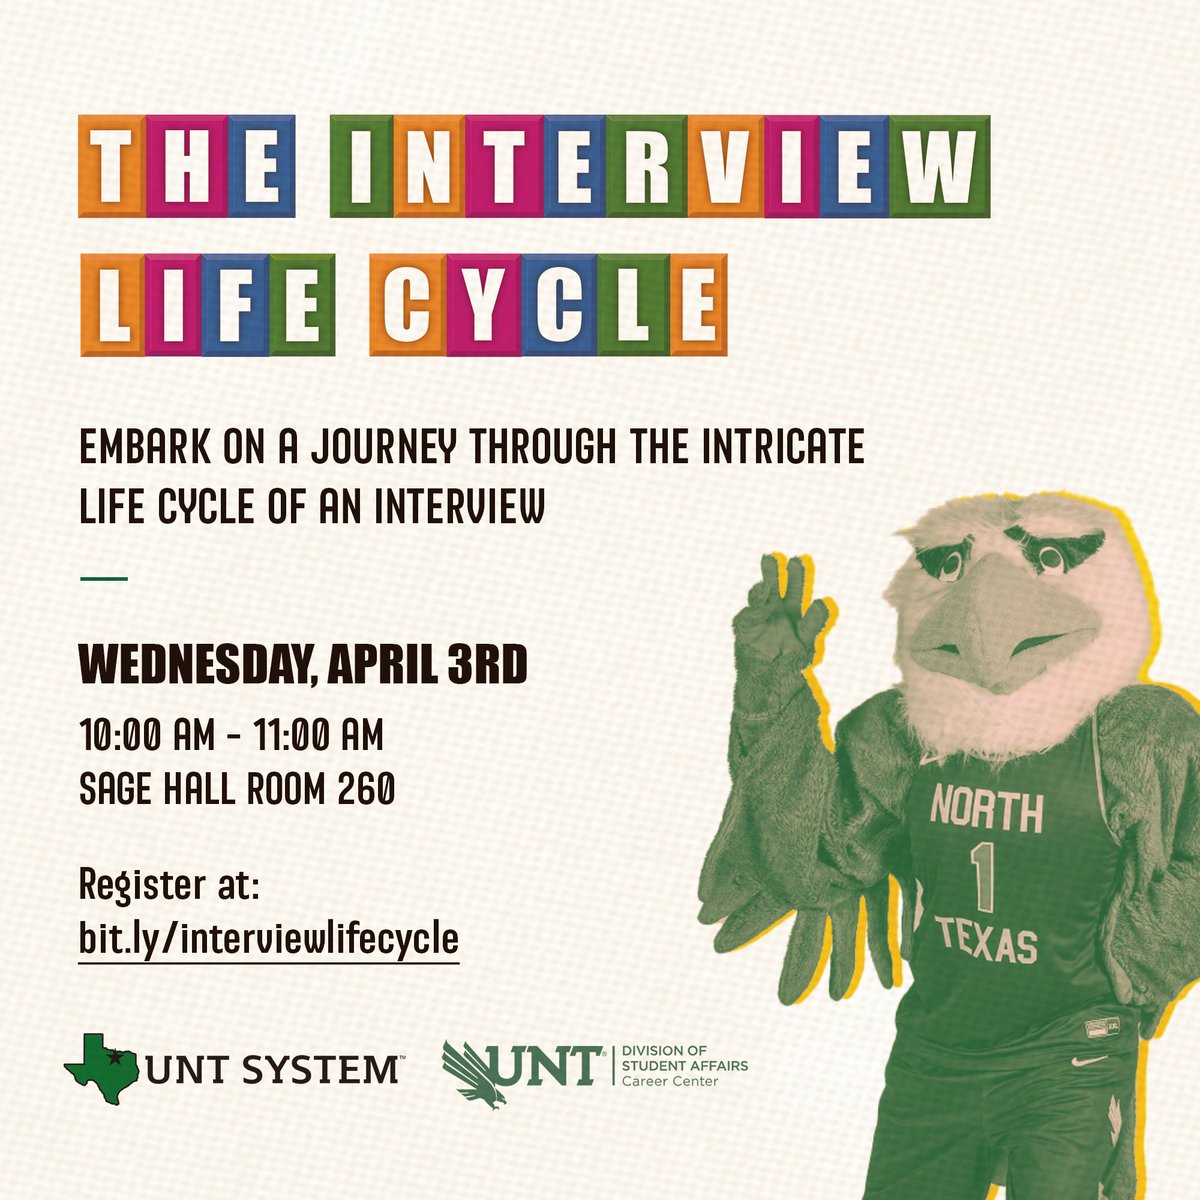 Mark your calendars because next Wednesday is The Interview Life Cycle event! 💛When & Where💛 - Wednesday, April 3rd - 10 - 11 AM - Sage Hall 260 Join us as we explore resume preparation, the dynamics of an interview, and much more! bit.ly/interviewlifec… @untsystem